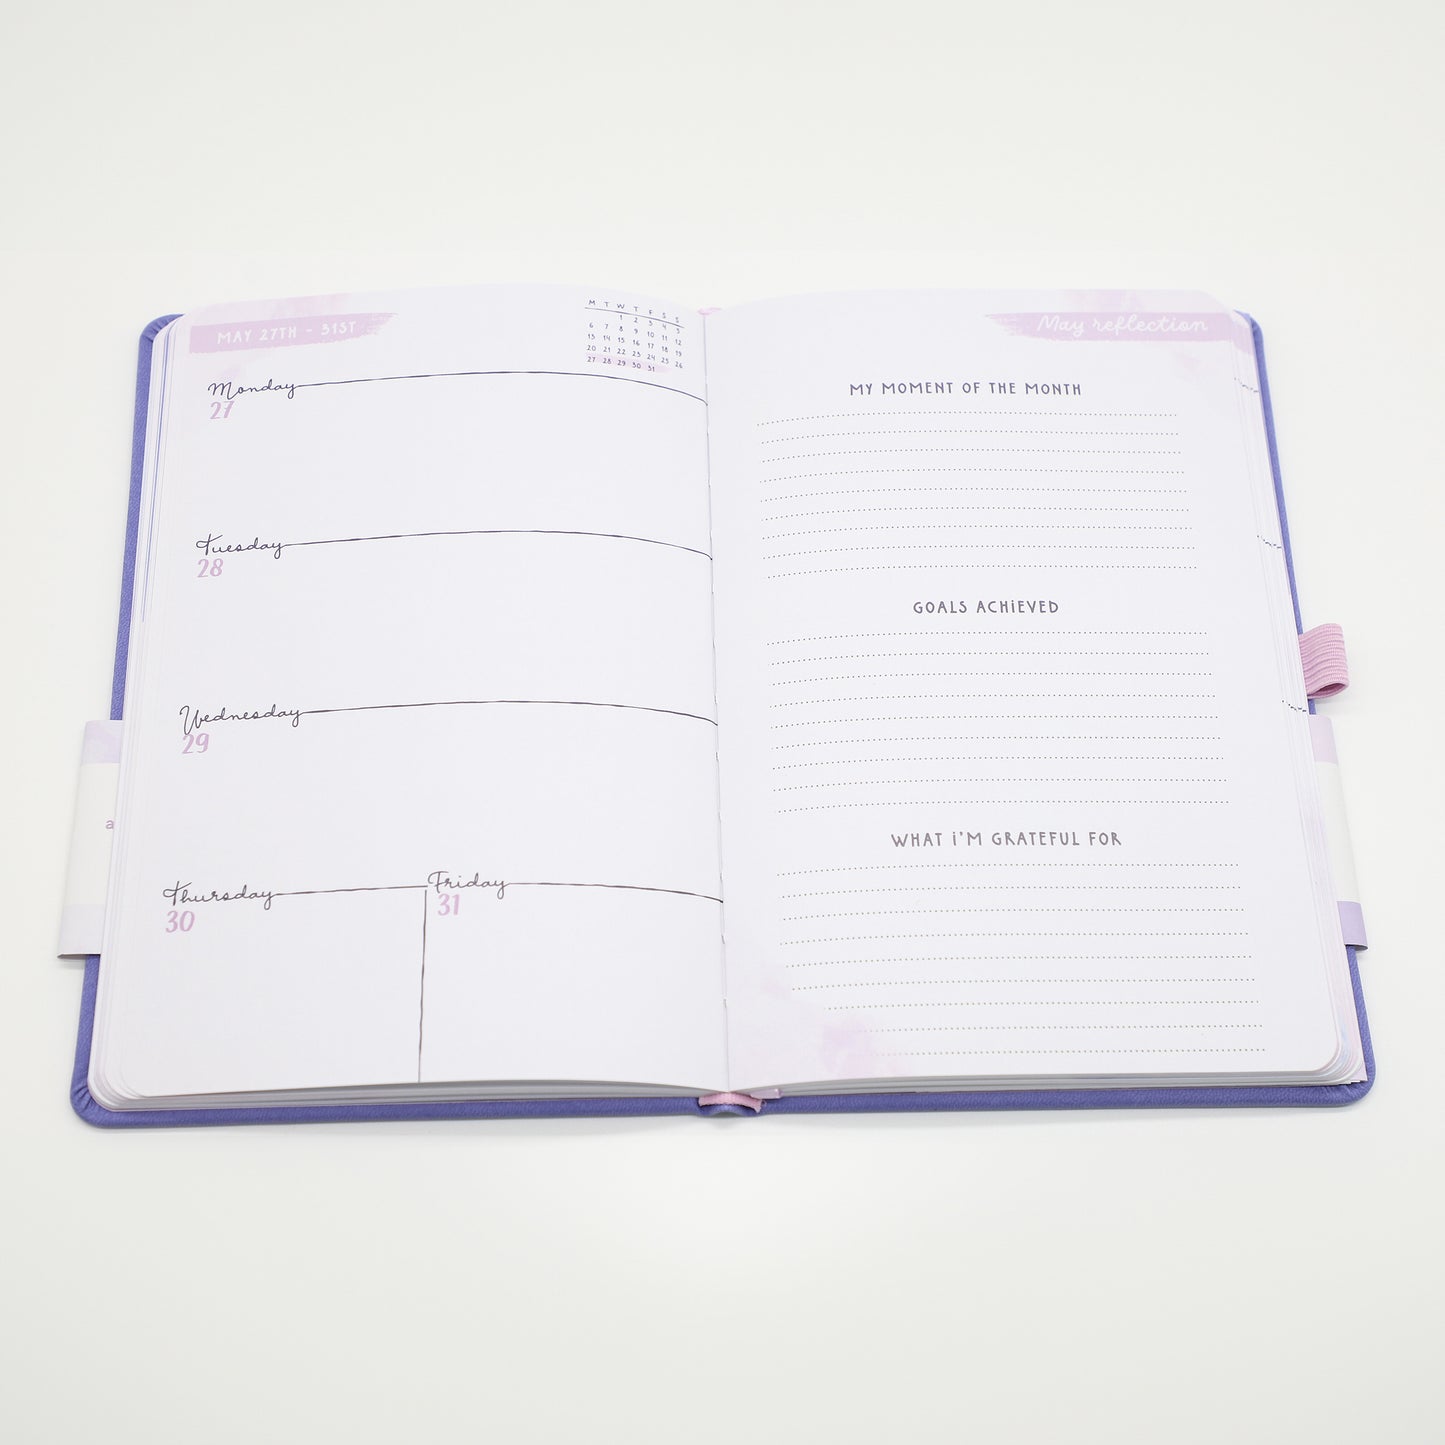 NEW - "One Day At A Time" 2024 Motivational Diary - Productivity Planner